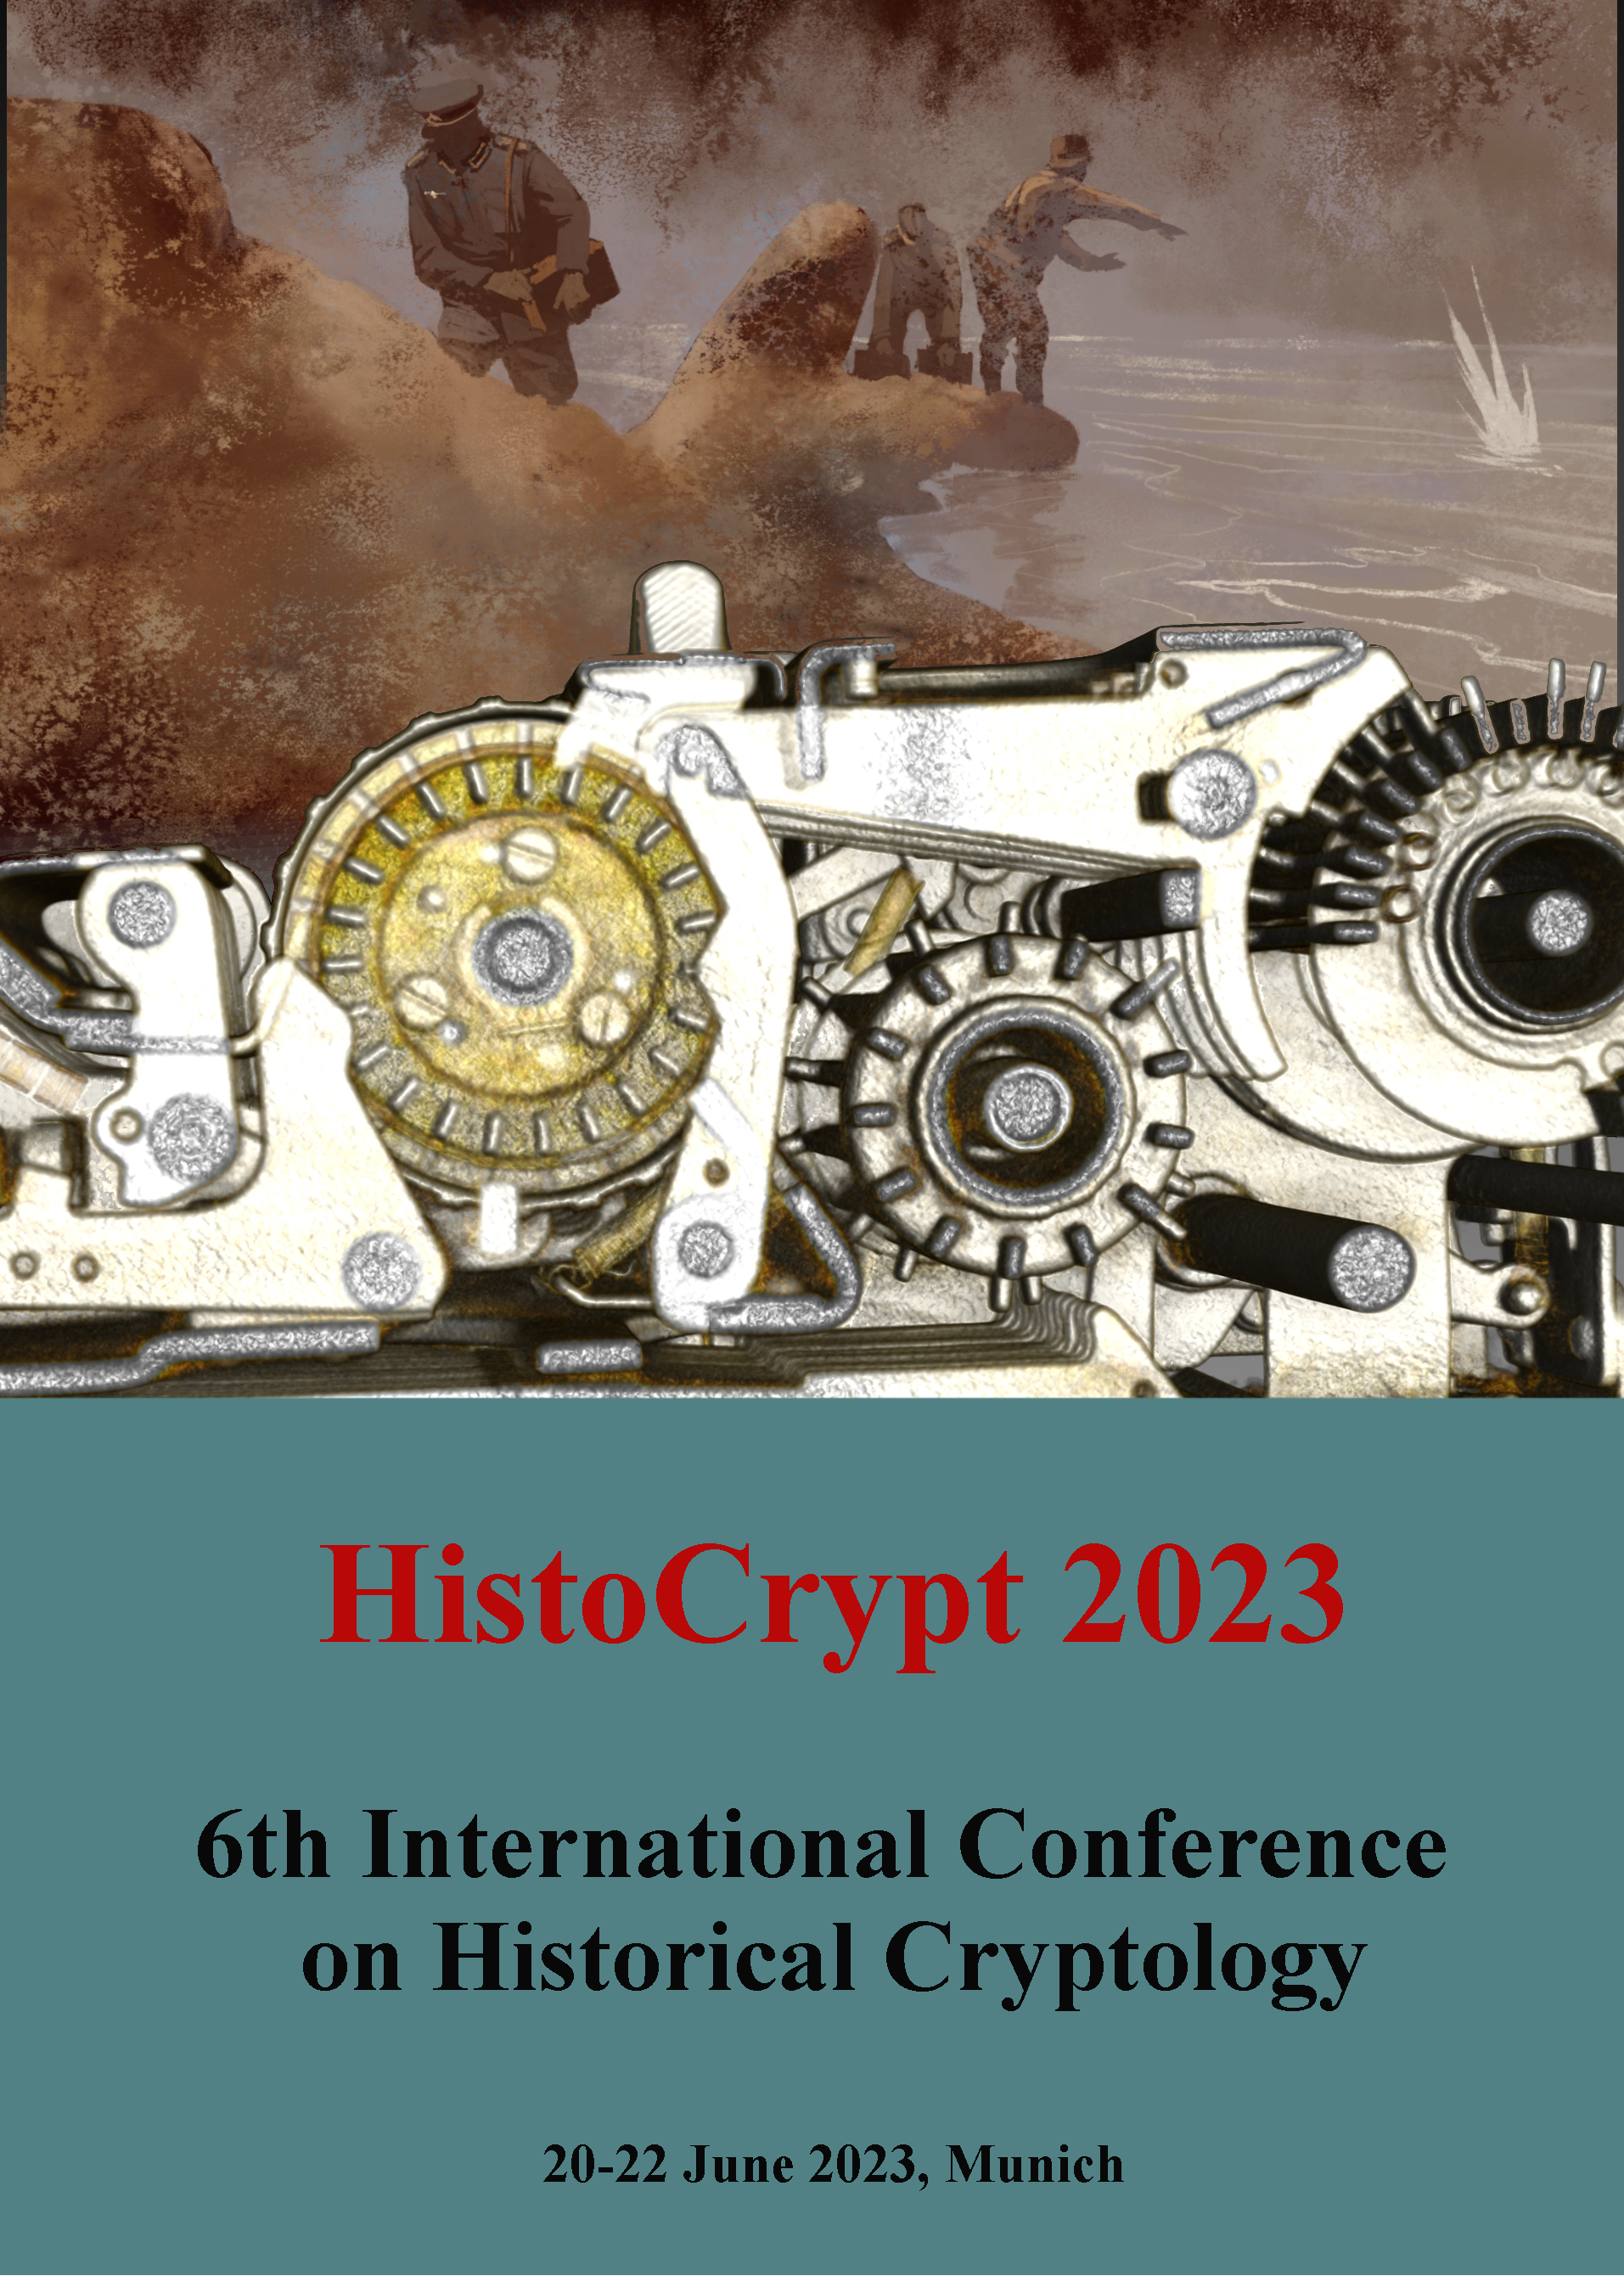 					View Proceedings of the 6th International Conference on Historical Cryptology HistoCrypt 2023
				